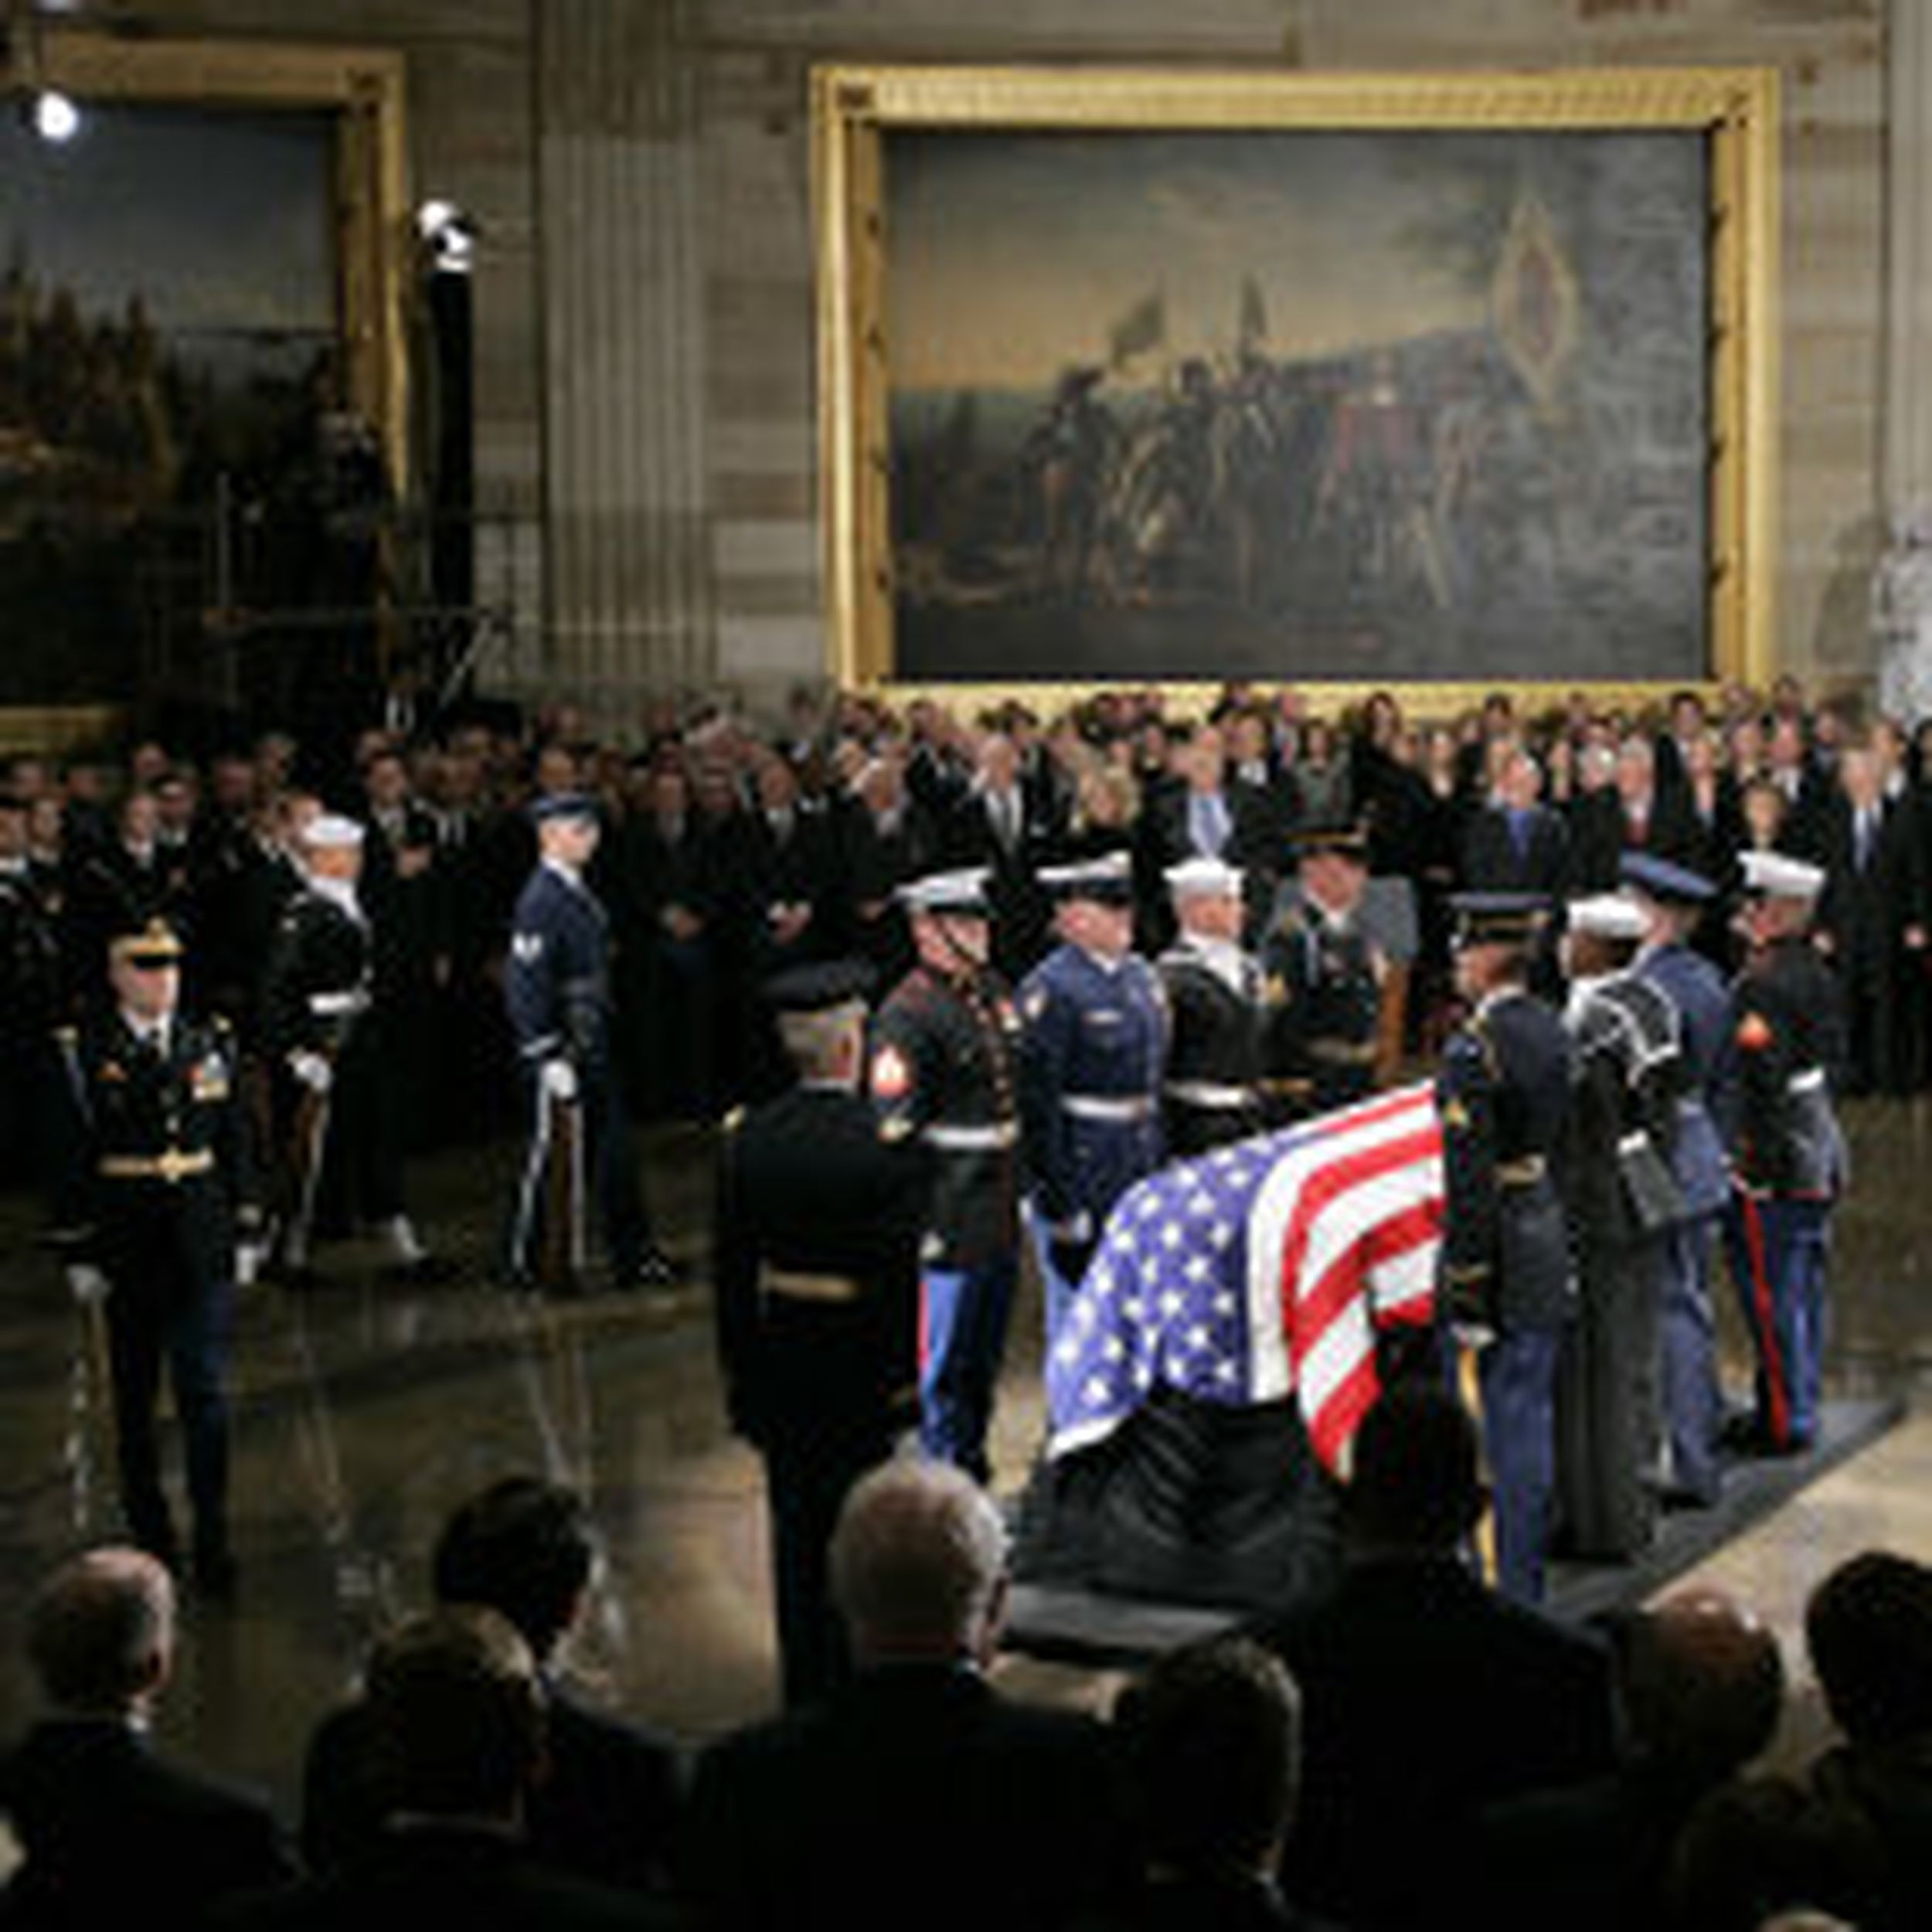 Gerald Ford State Funeral Casket In Capitol Rotunda 8x12 Silver Halide Photo 